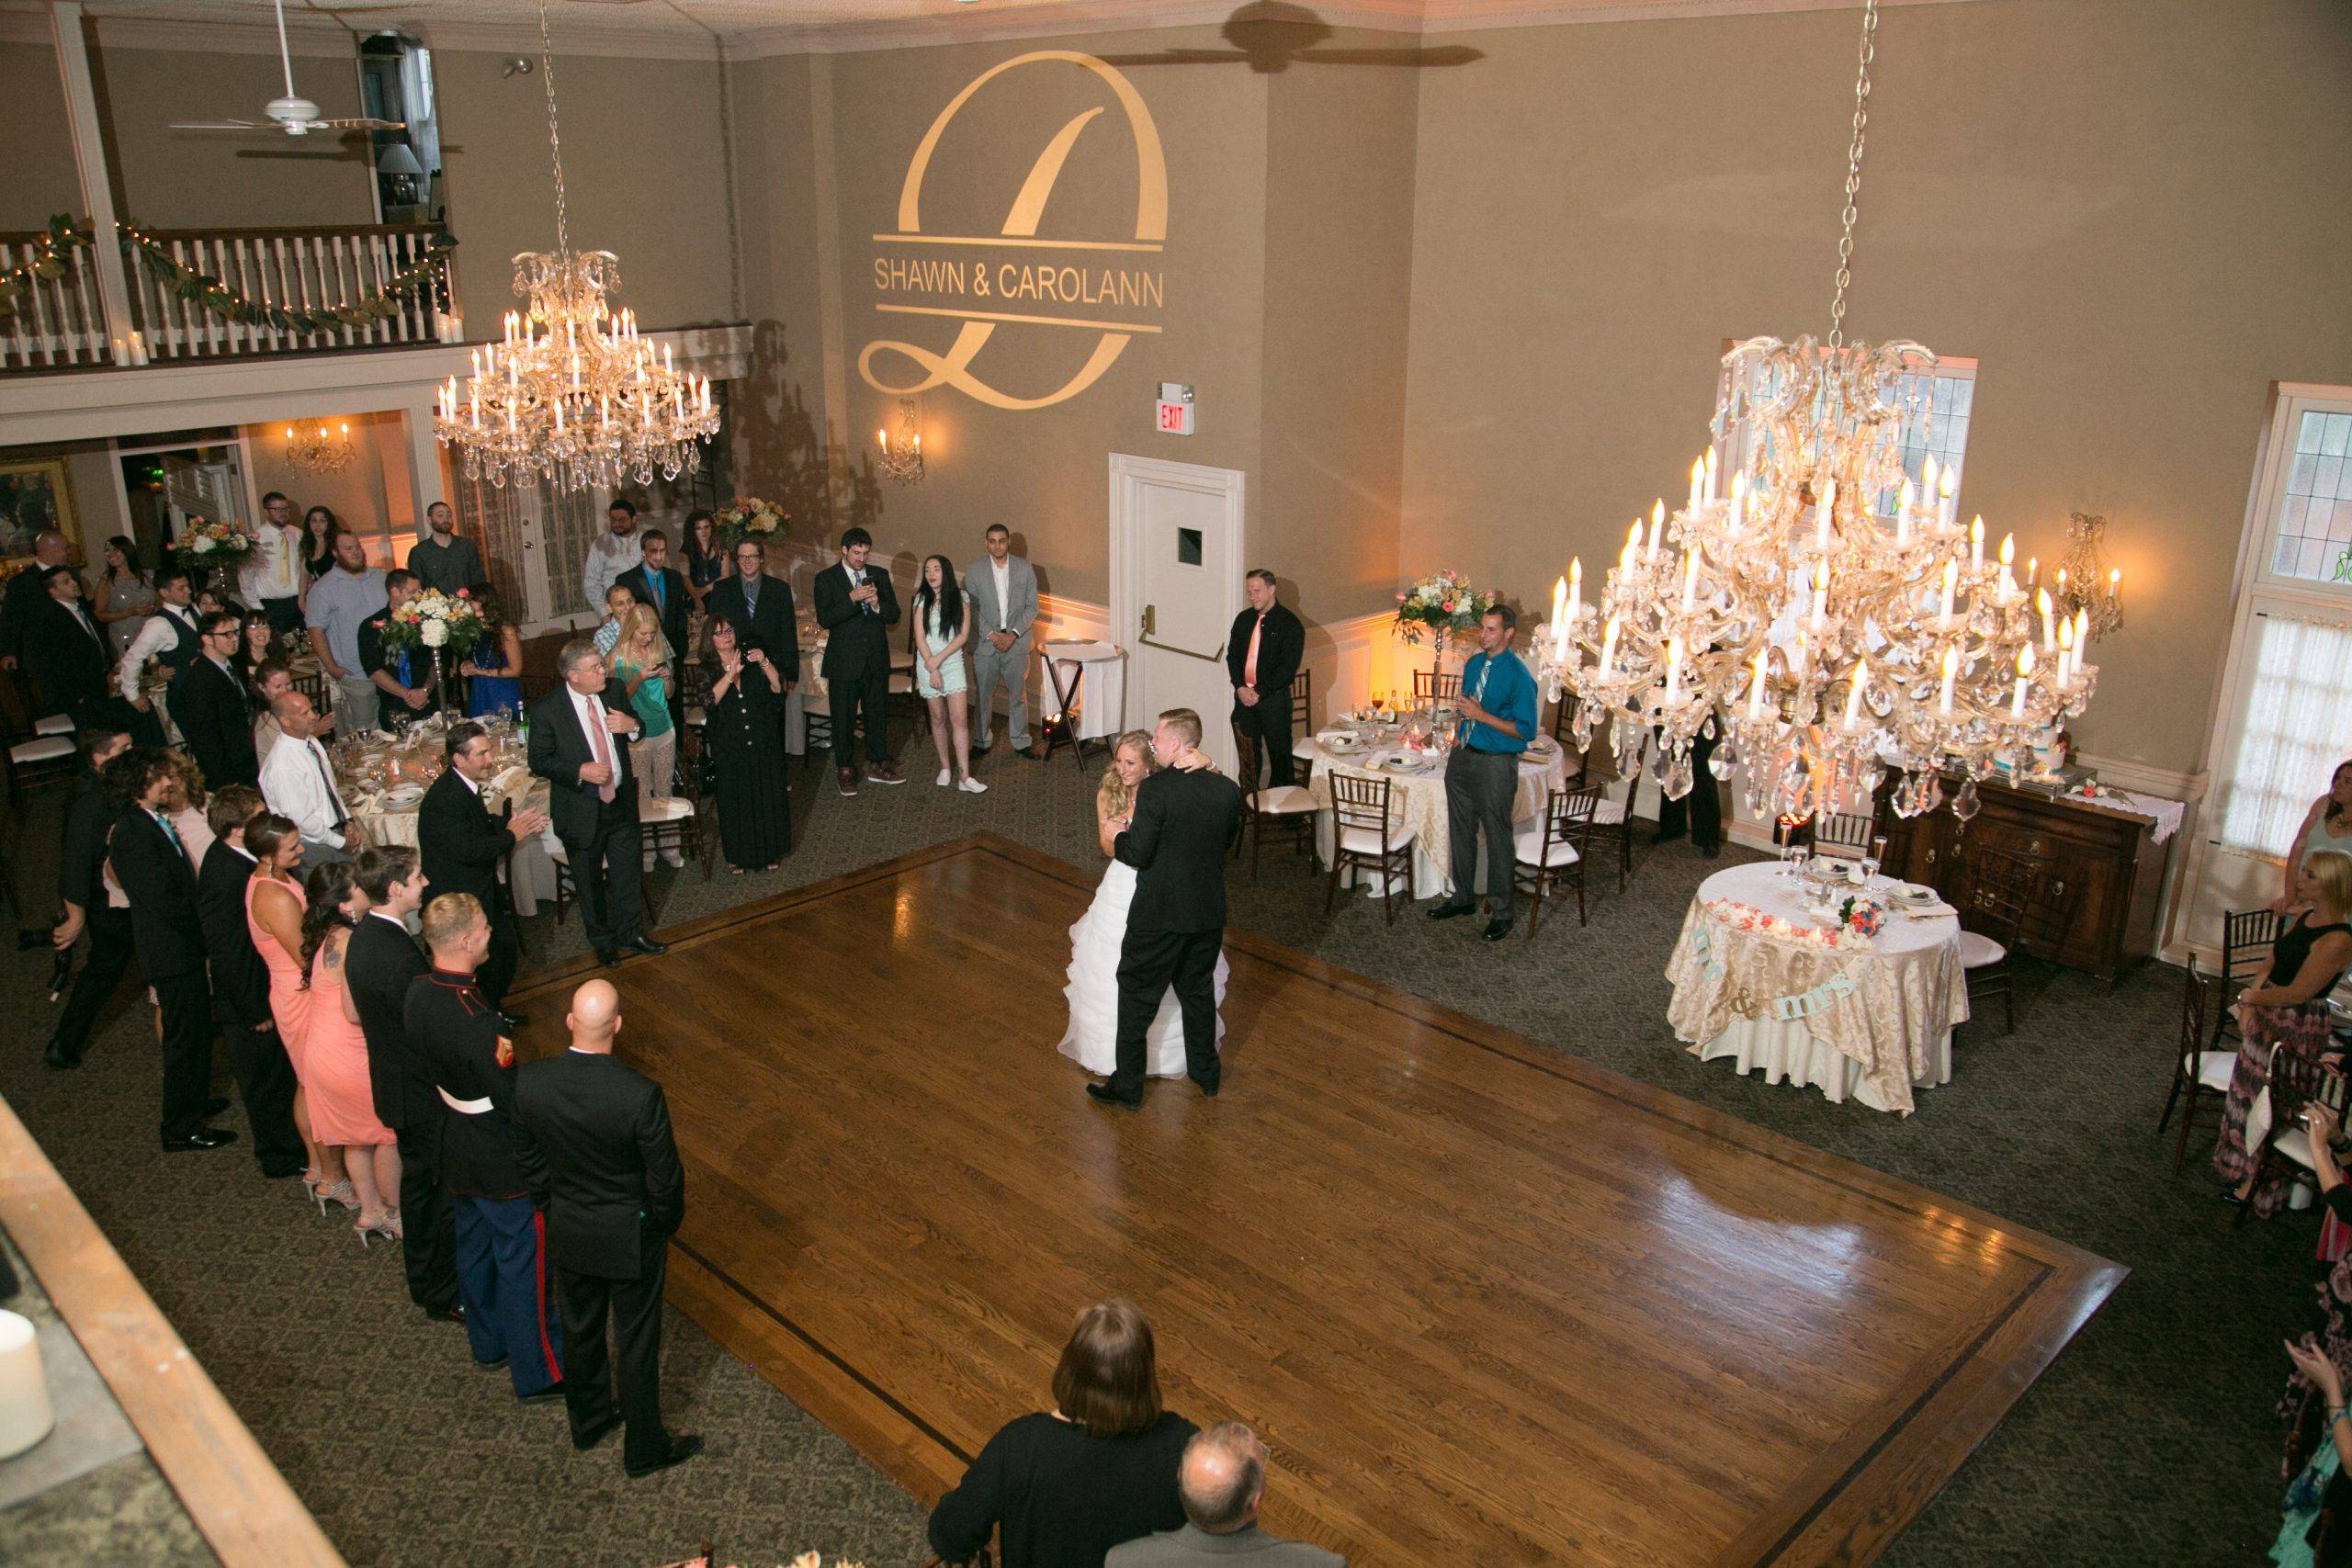 A bride and groom dance in a large room with chandeliers.